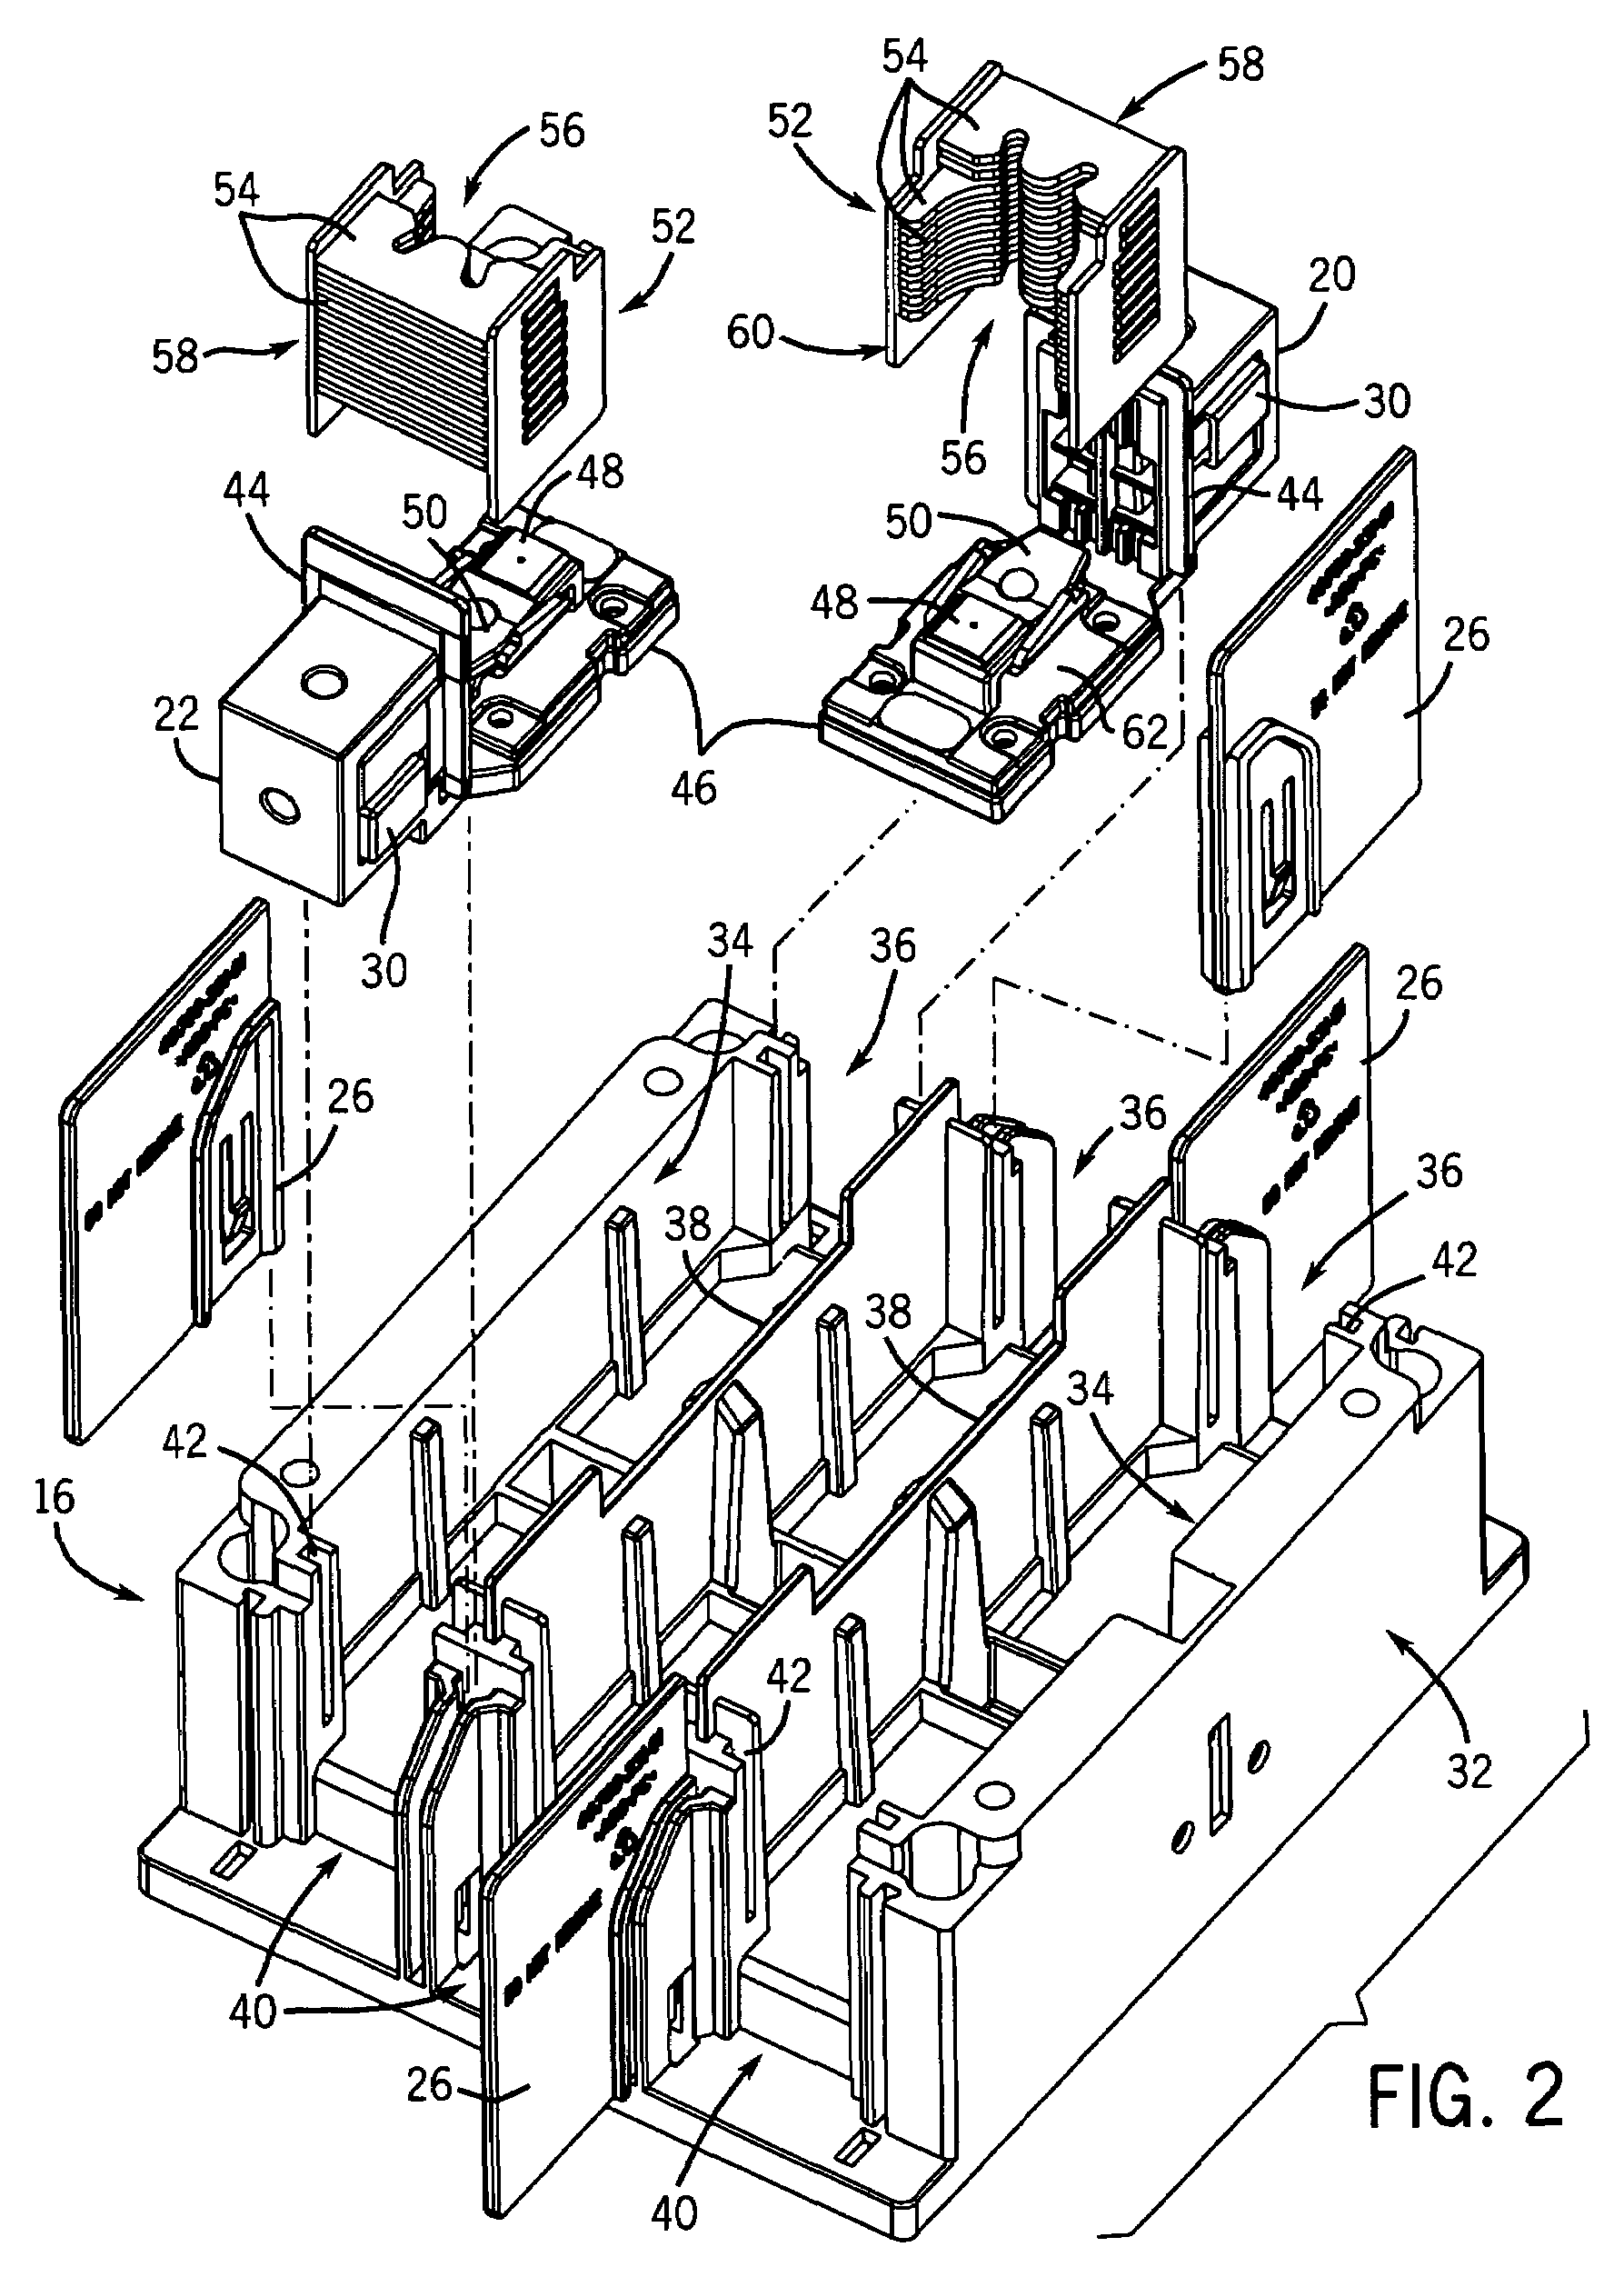 Gas diverter for an electrical switching device